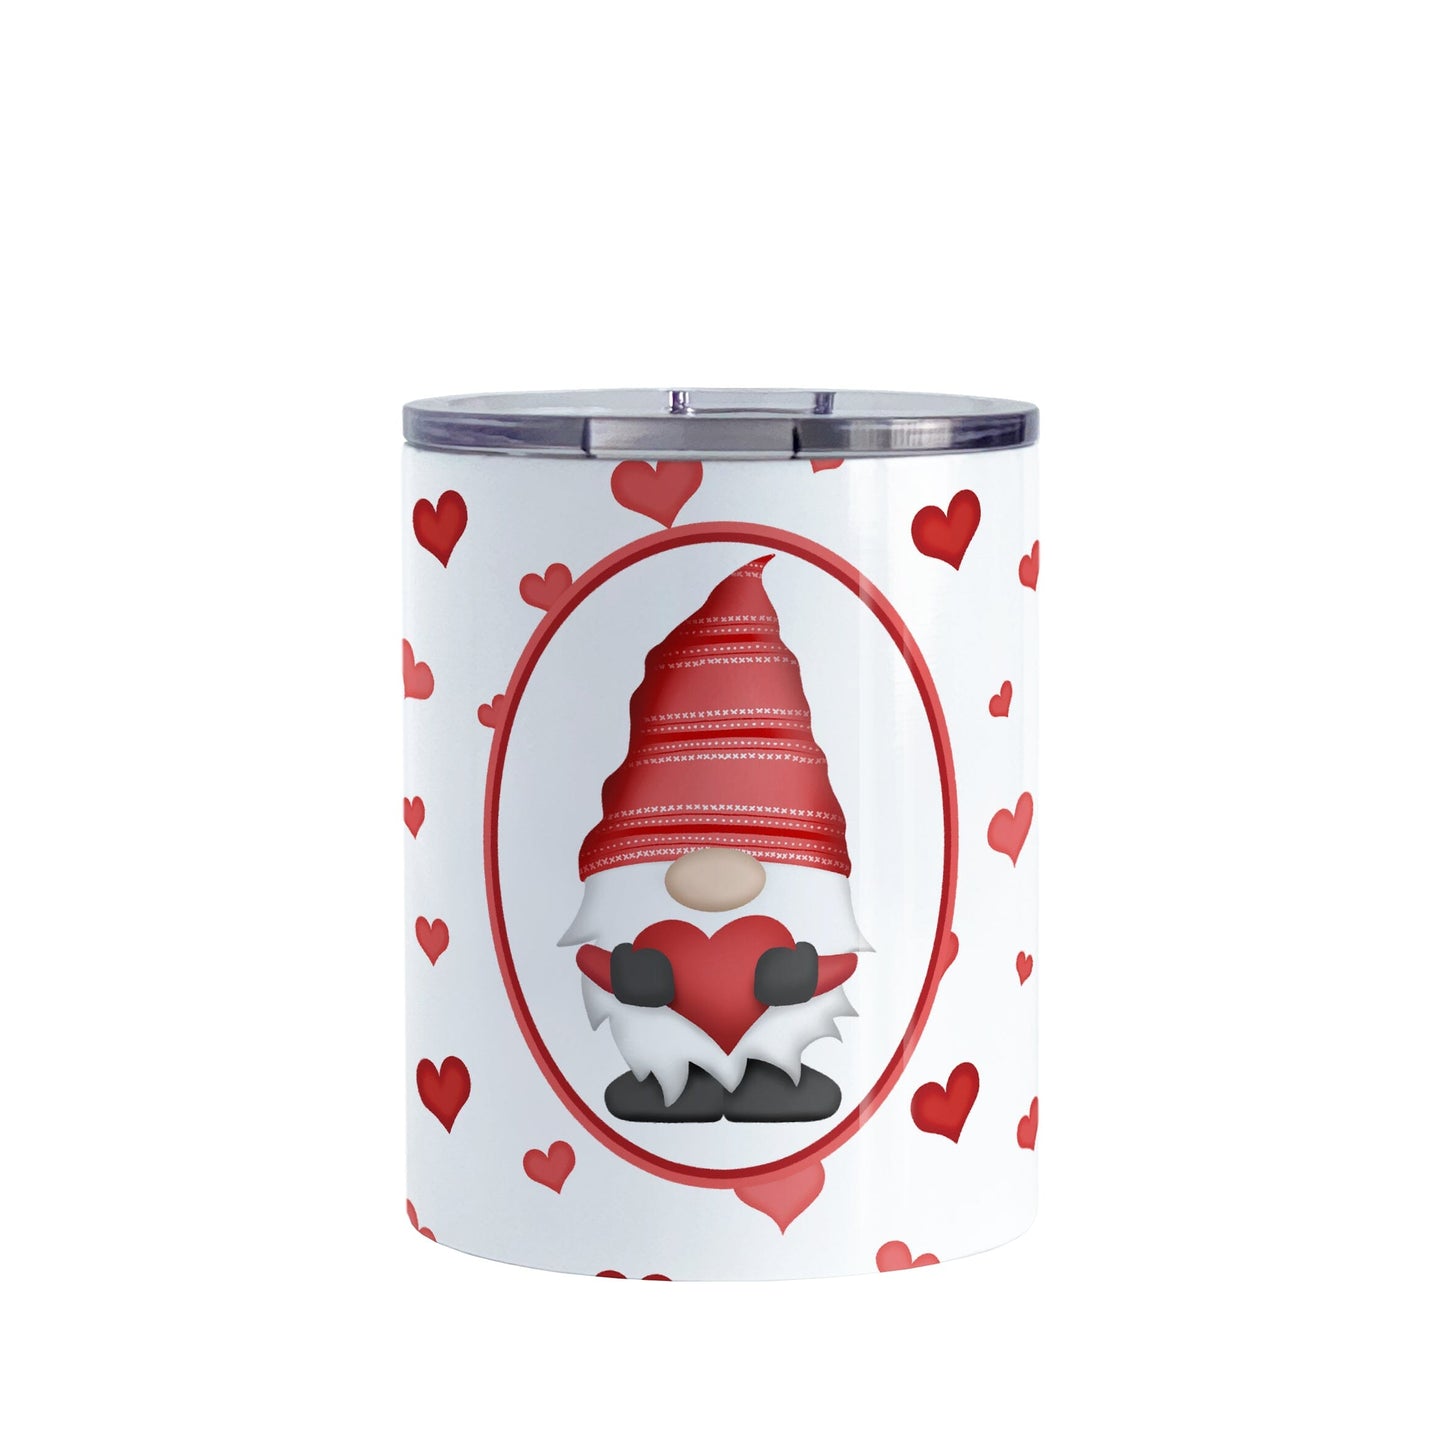 Red Gnome Dainty Hearts Tumbler Cup (10oz) at Amy's Coffee Mugs. A stainless steel tumbler cup designed with an adorable red gnome holding a heart in a white oval over a pattern of cute and dainty hearts in different shades of red that wrap around the cup.